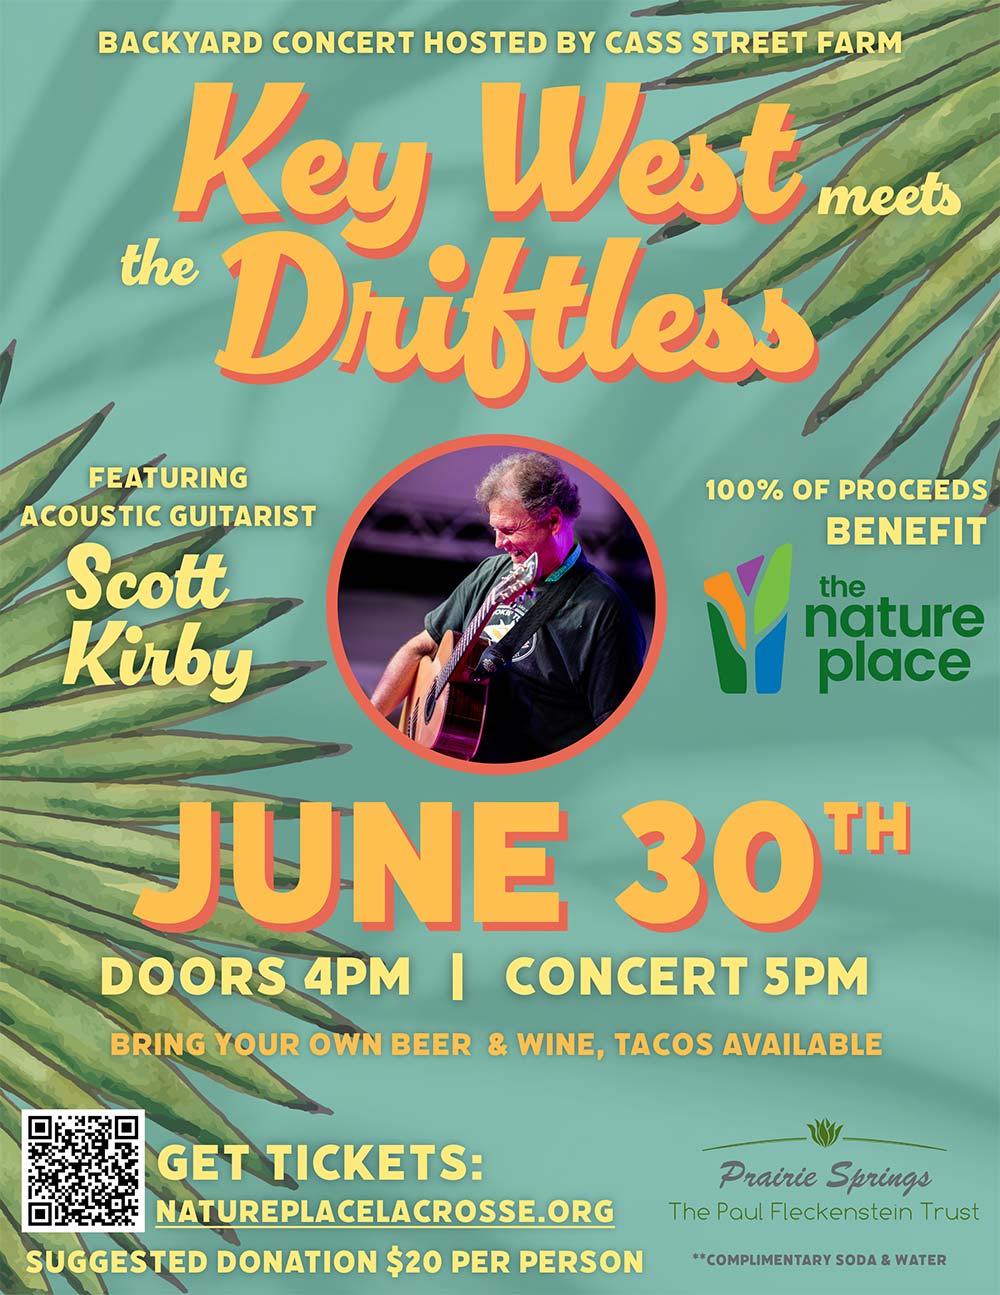 Key West meets the Driftless - Featuring Acoustic Guitarist Scott Kirby